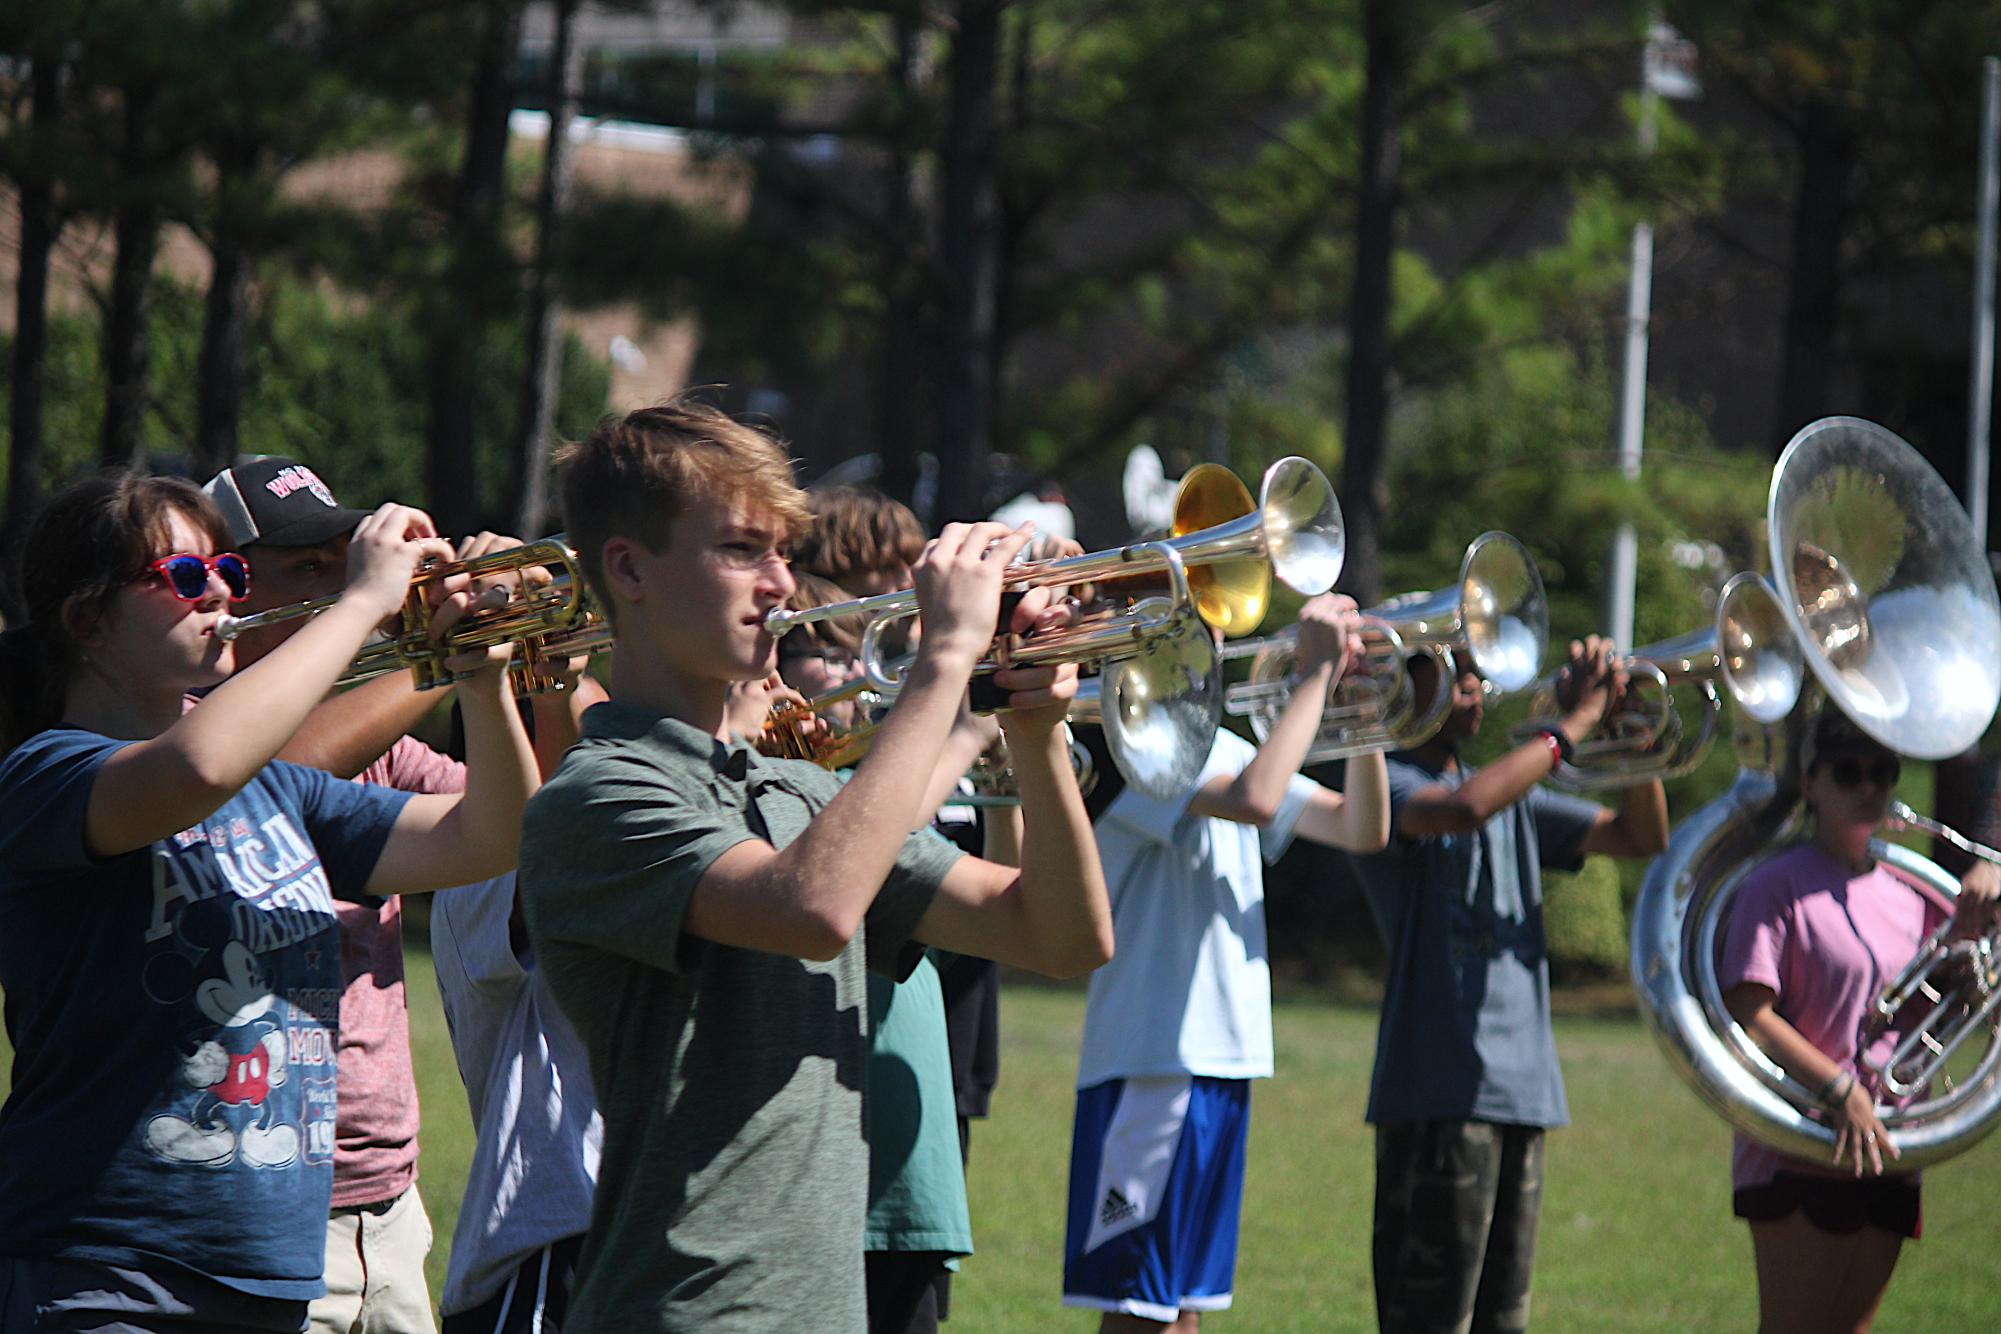 The Wakefield band practices outside in preparation for their Homecoming performance. The brass section gets ready for both playing and marching.